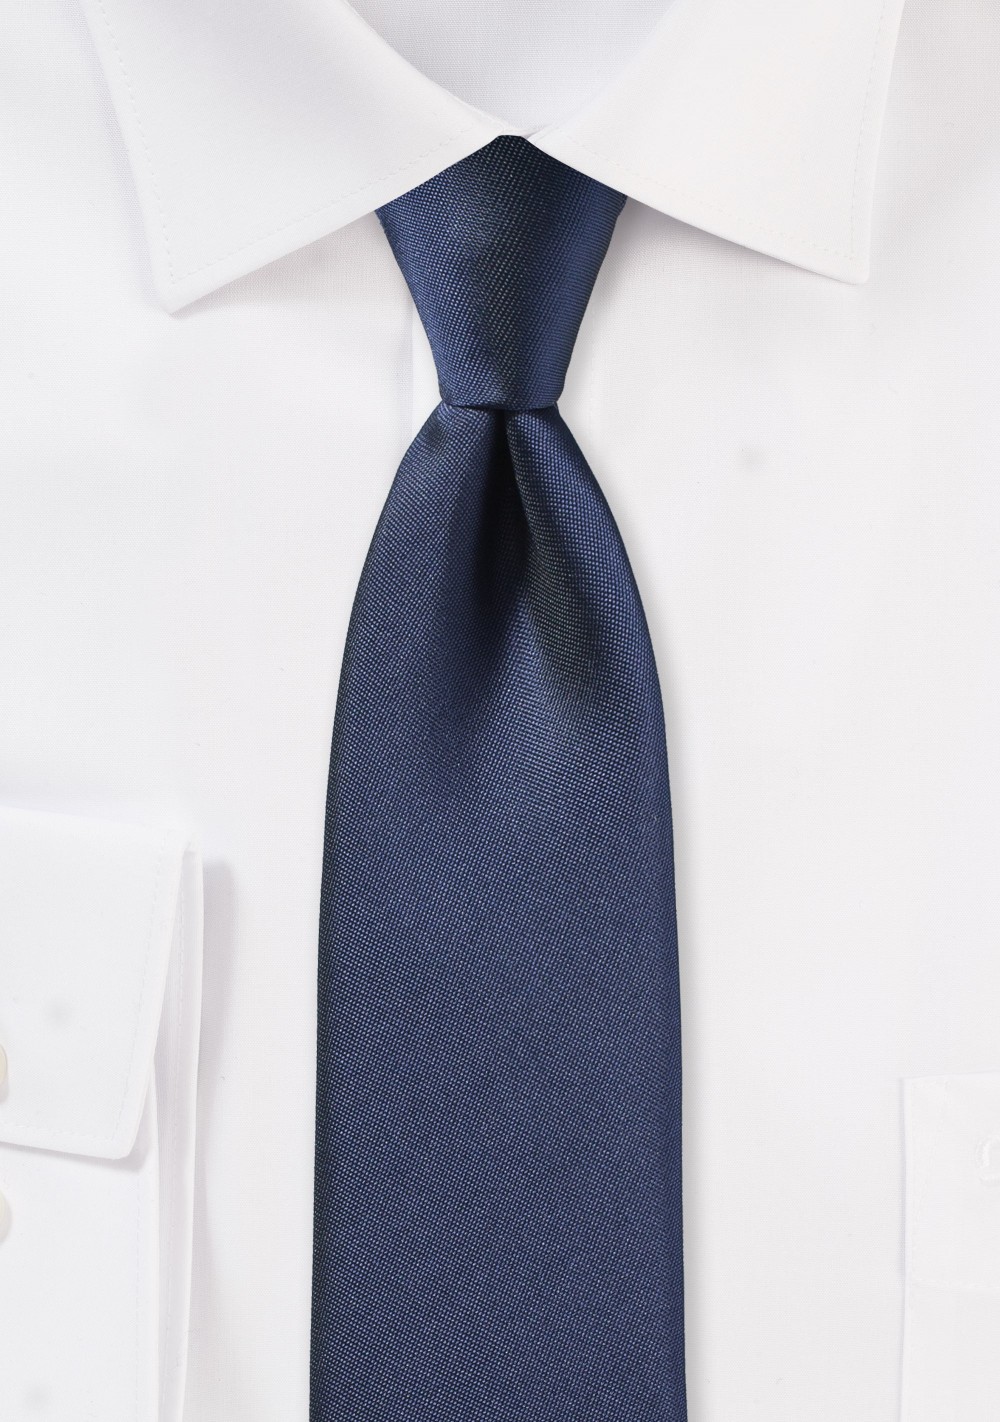 Details about  / Nordstrom men/'s Navy Skinny 2.75 inchesFloral tie